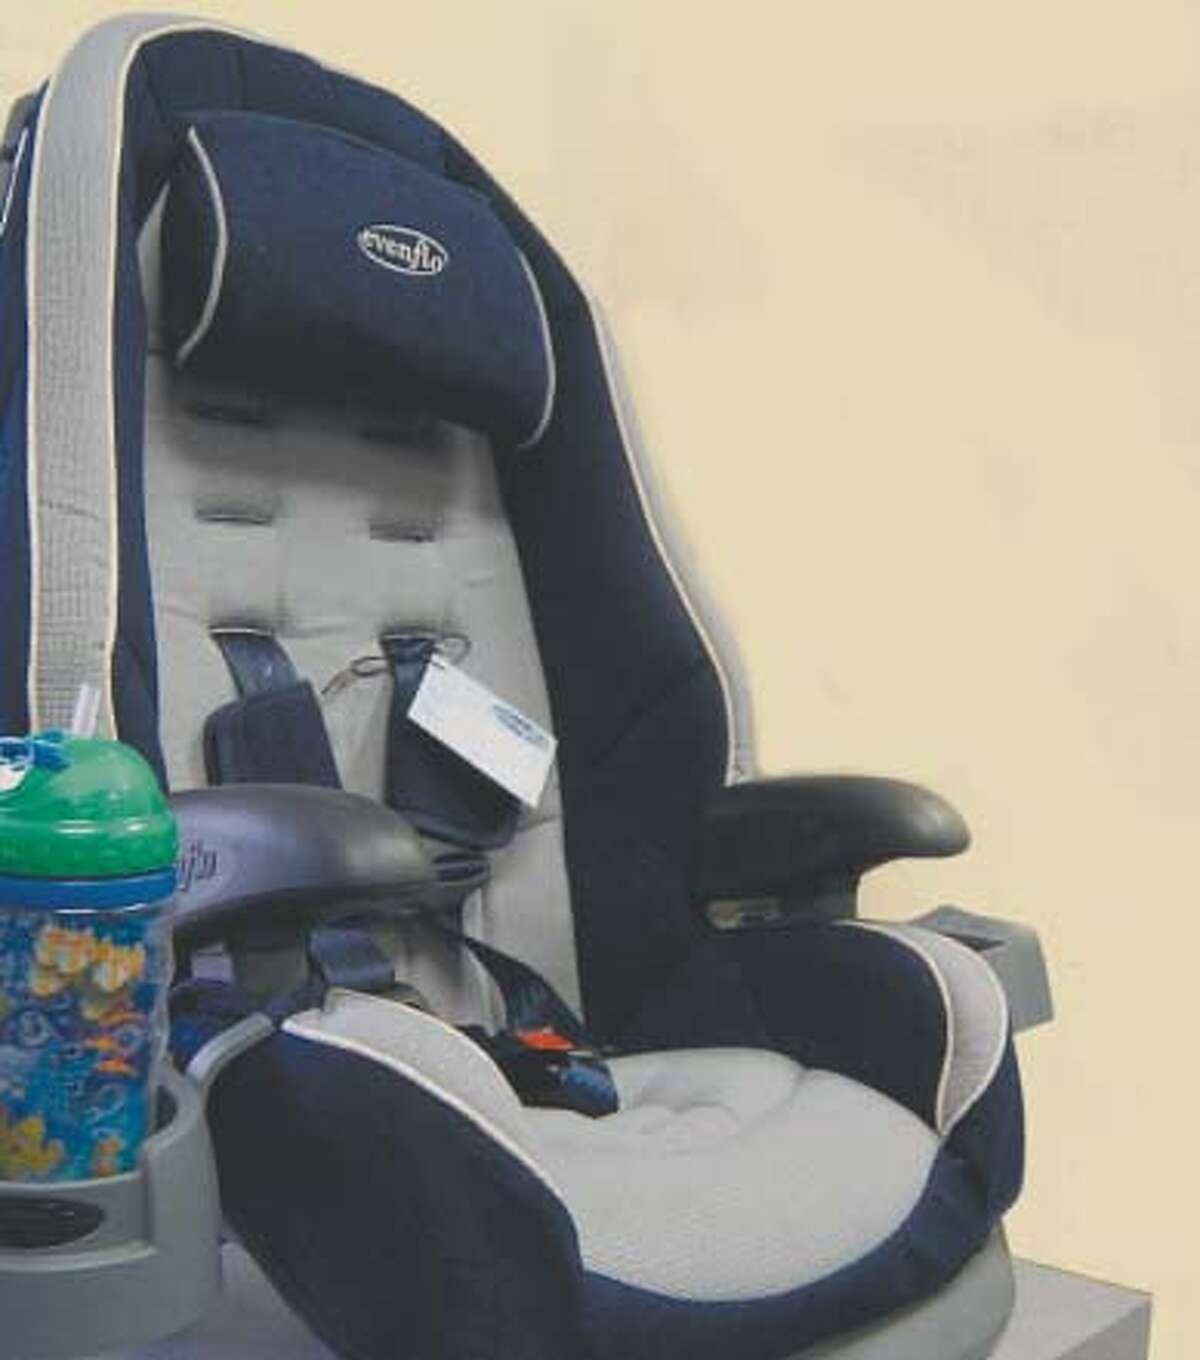 The state Legislature has passed a bill to require parents to strap their kids into backseat car booster seats until they are 8 years old or reach a certain height.